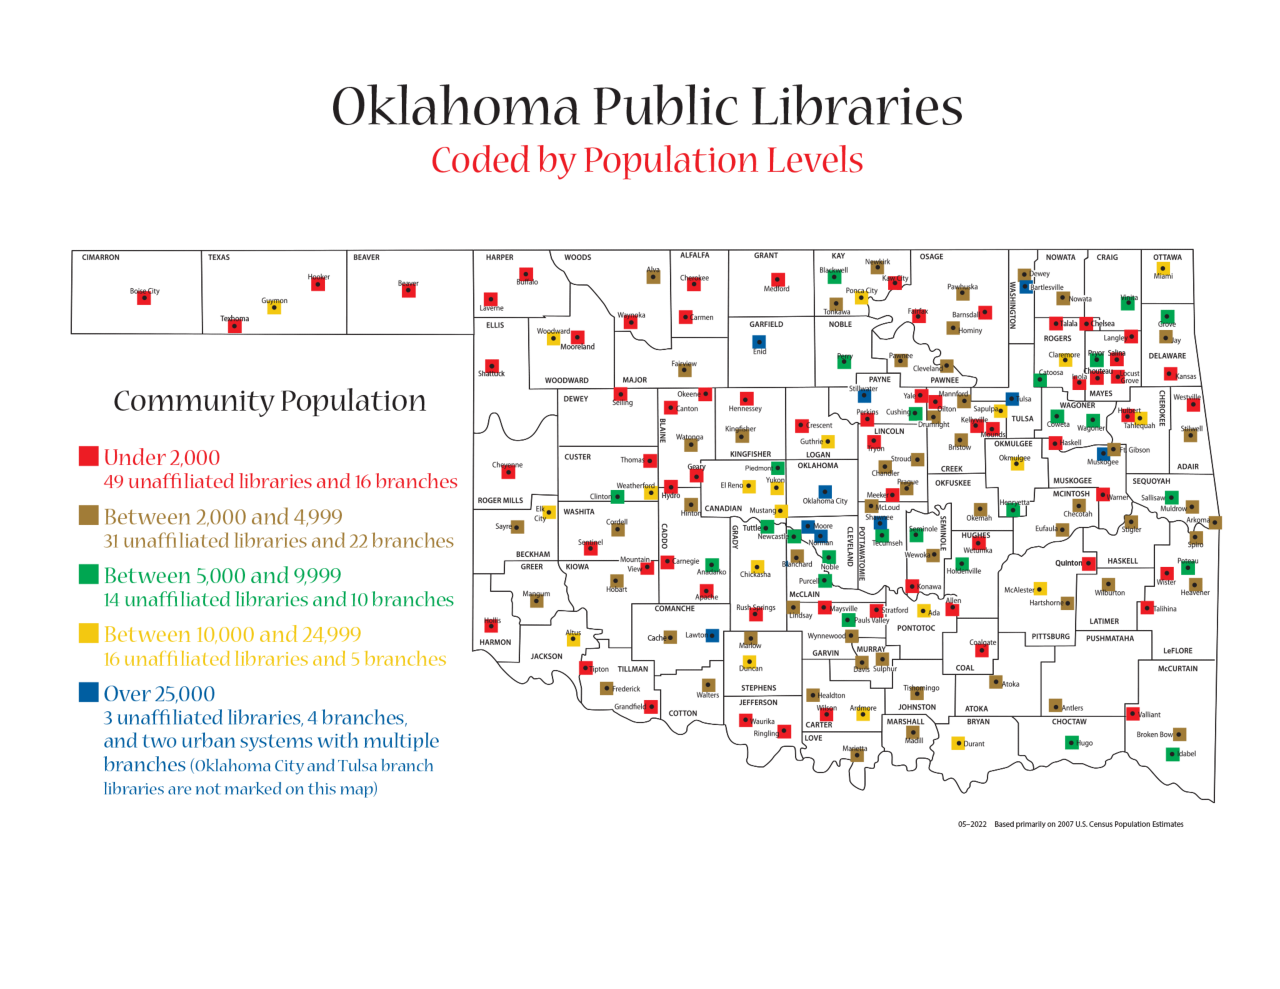 Libraries by Population Levels